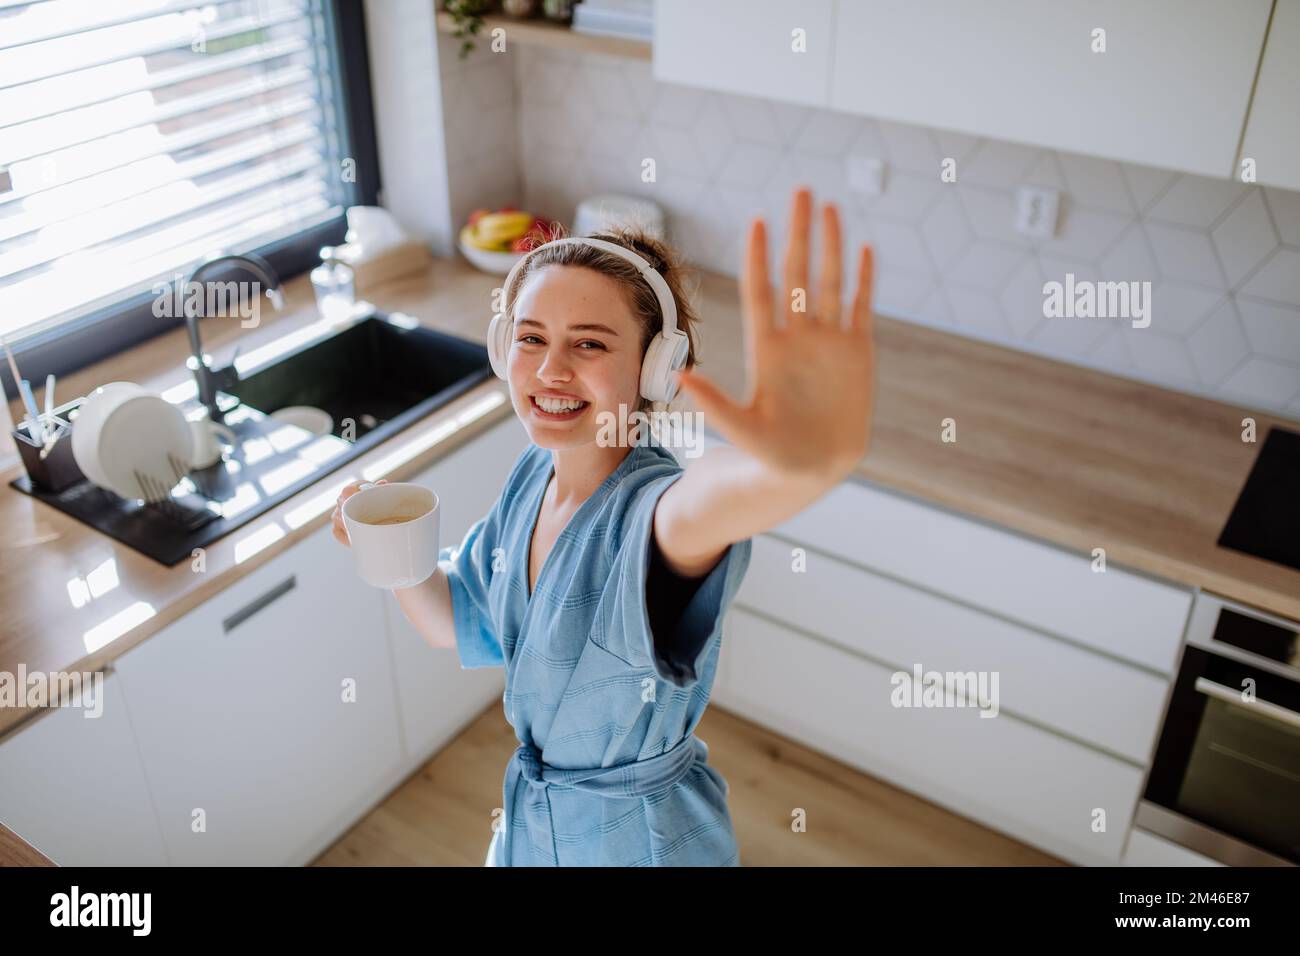 Young woman listening music and enjoying cup of coffee at morning, in her kitchen. Stock Photo